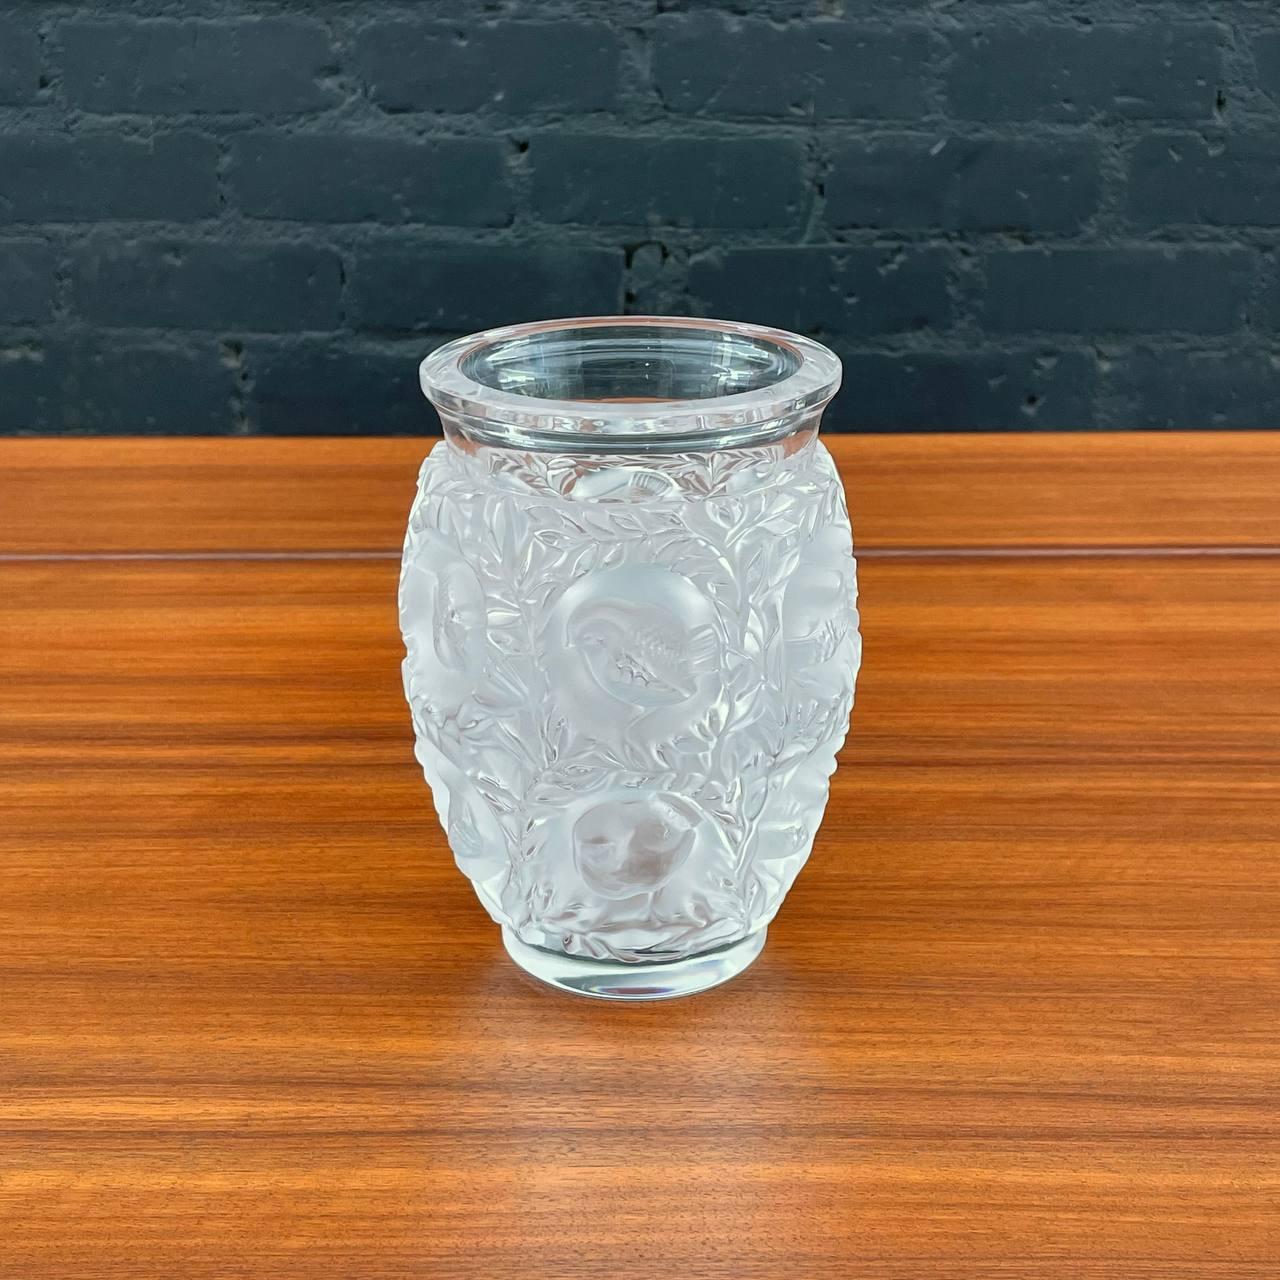 Lalique Bagatelle Crystal Vase

Country: France
Materials: Crystal Glass
Condition: Original Vintage Condition
Style: Art Nouveau 
Year: 2,000’s

$650

Dimensions:
6.75”H x 4.74”W x 4.75”D.